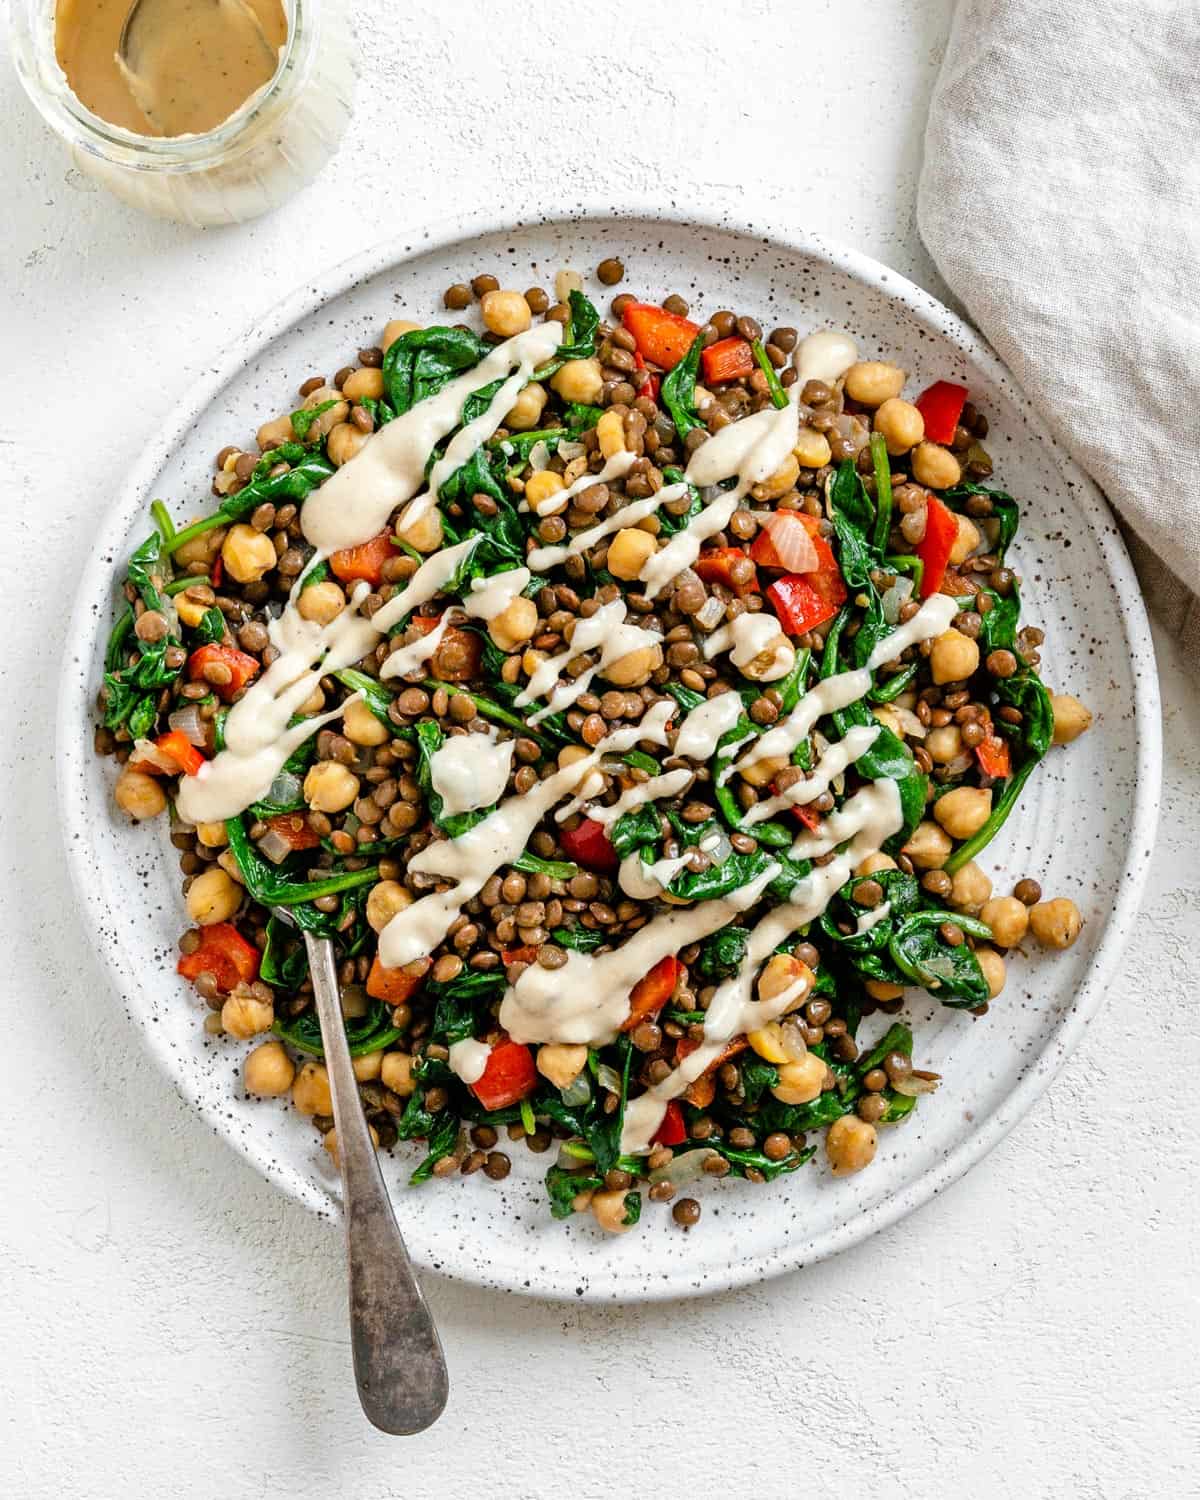 completed Vegan Lentil Chickpea Salad plated on a white plate against a white surface